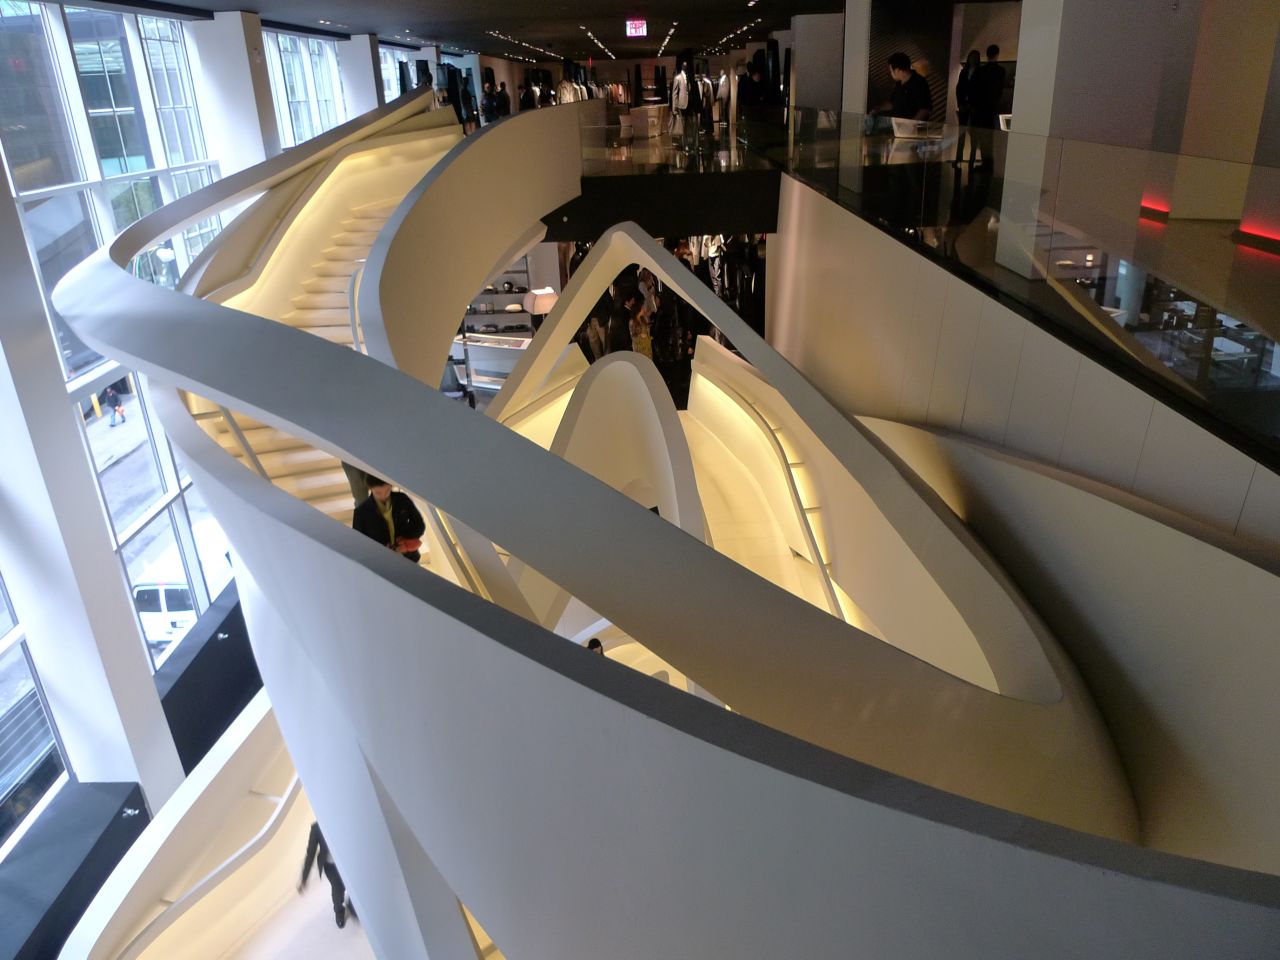 Armani's 5th Avenue store in New York City was imagined by Italian husband and wife architectural team Massimiliano and Doriana Fuksas. The central focus of the designs in-store include a magnificent sculptural steel staircase. 